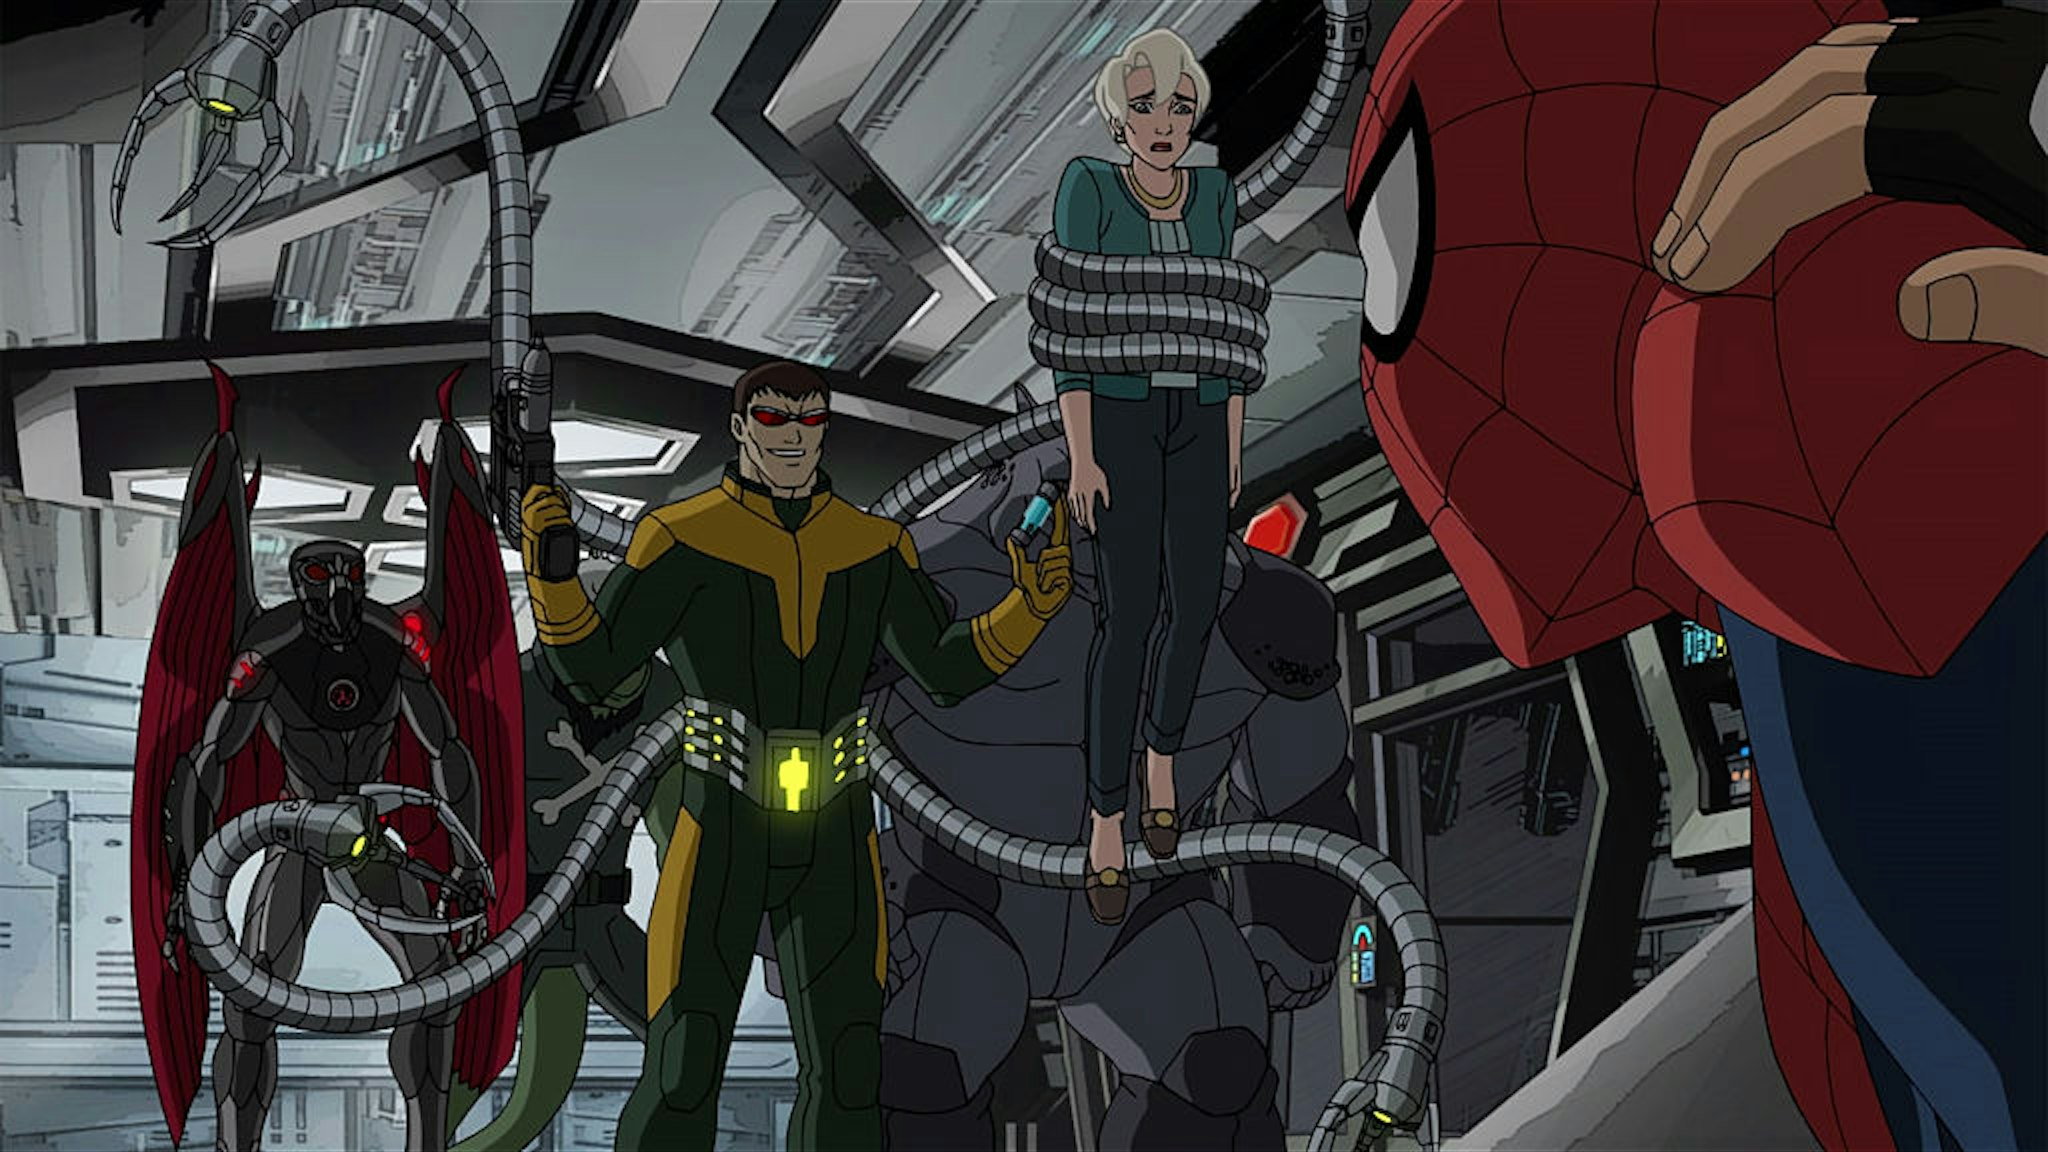 MARVEL'S ULTIMATE SPIDER-MAN VS. THE SINISTER 6 - "Graduation Day - Part 1" - Doctor Octopus (Doc Ock) threatens to harm Aunt May if Spidey ever puts on his mask again. Spider-Man must track down Doc Ock before he has a chance to put his plan into action. This episode of "Marvel's Ultimate Spider-Man VS. The Sinister 6" airs Saturday, January 07 (7:30 - 8:00 P.M. EST) on Disney XD. (Marvel via Getty Images) VULTURE, DOC OCK, AUNT MAY, RHINO, SPIDER-MAN